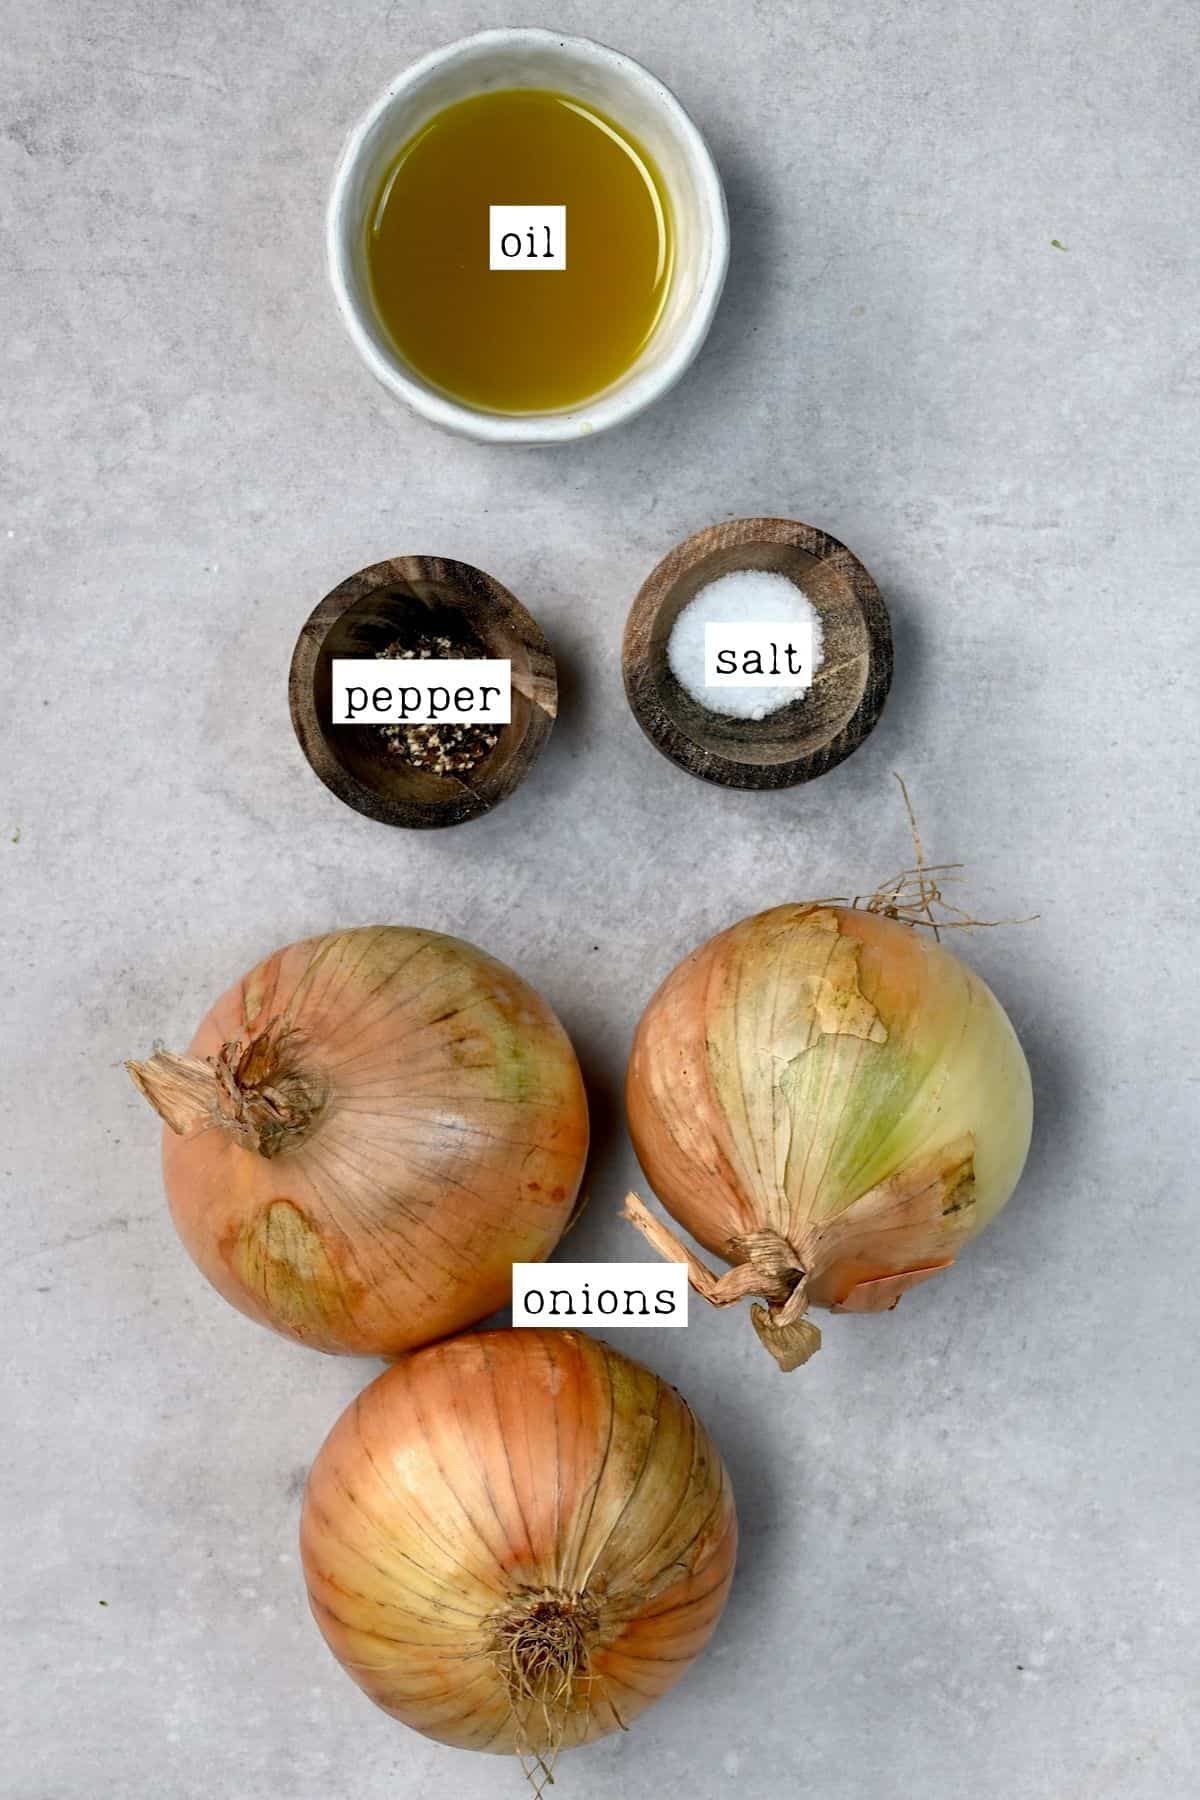 Ingredients for grilled onions